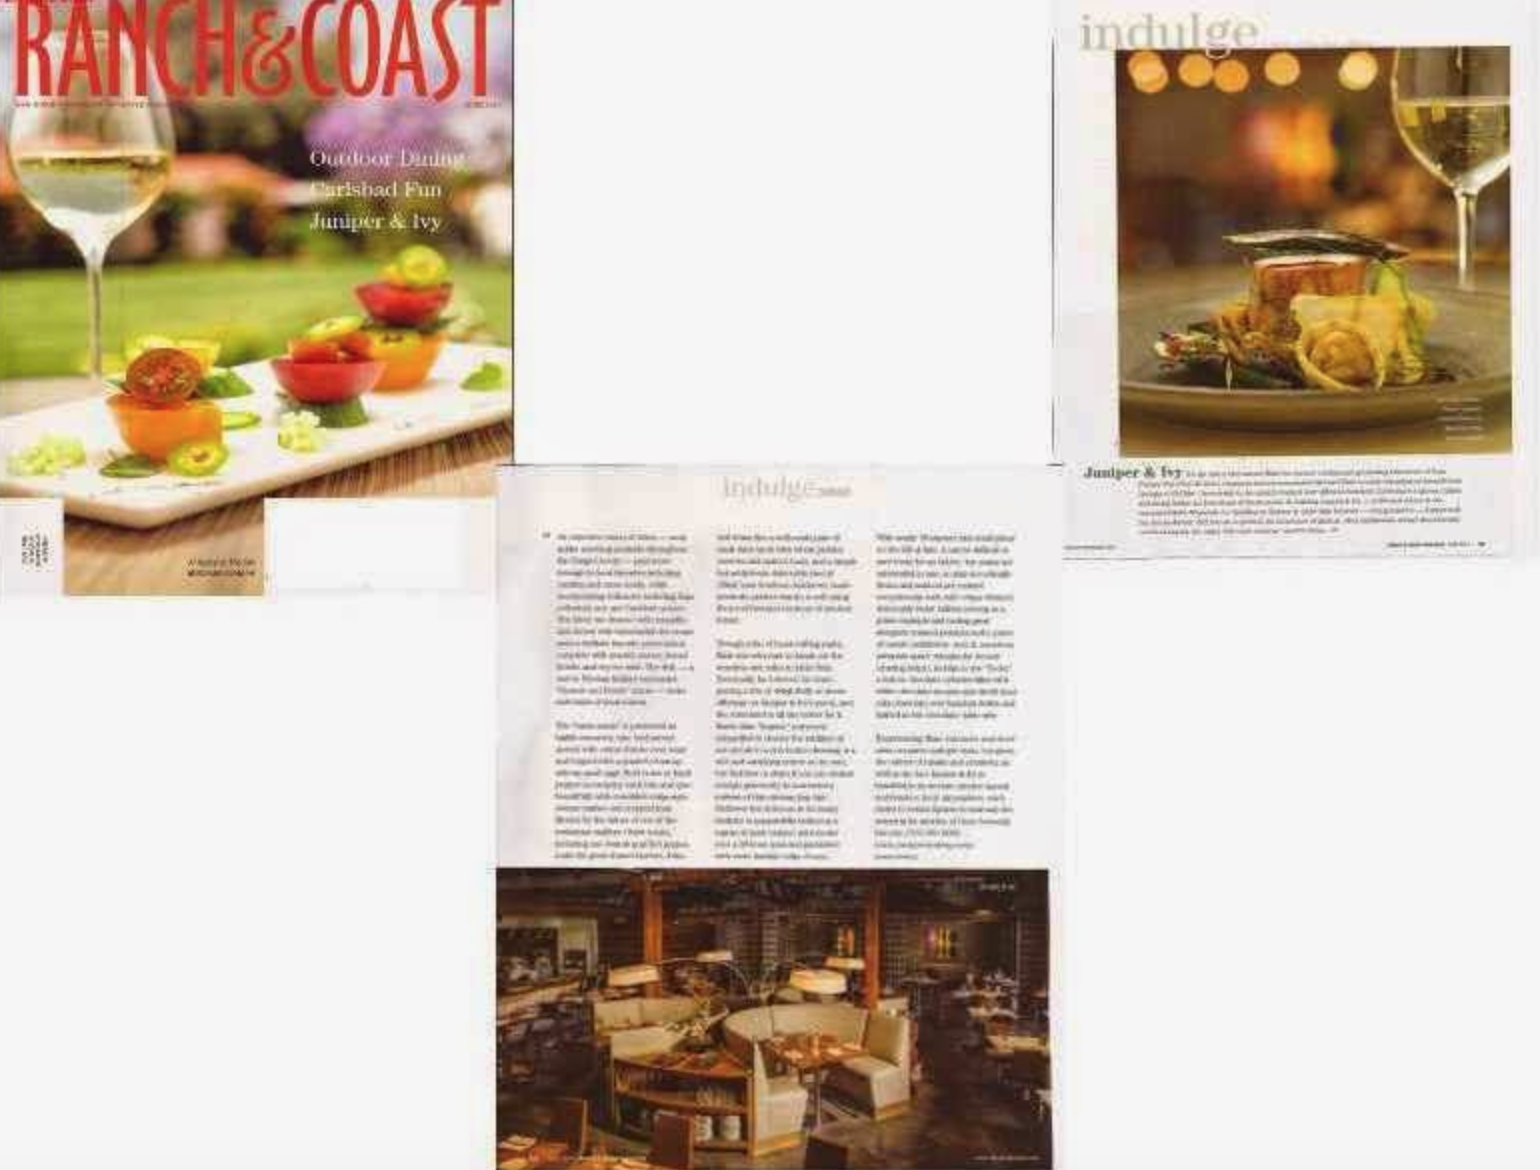 Ranch & Coast Magazine Cover and Articles